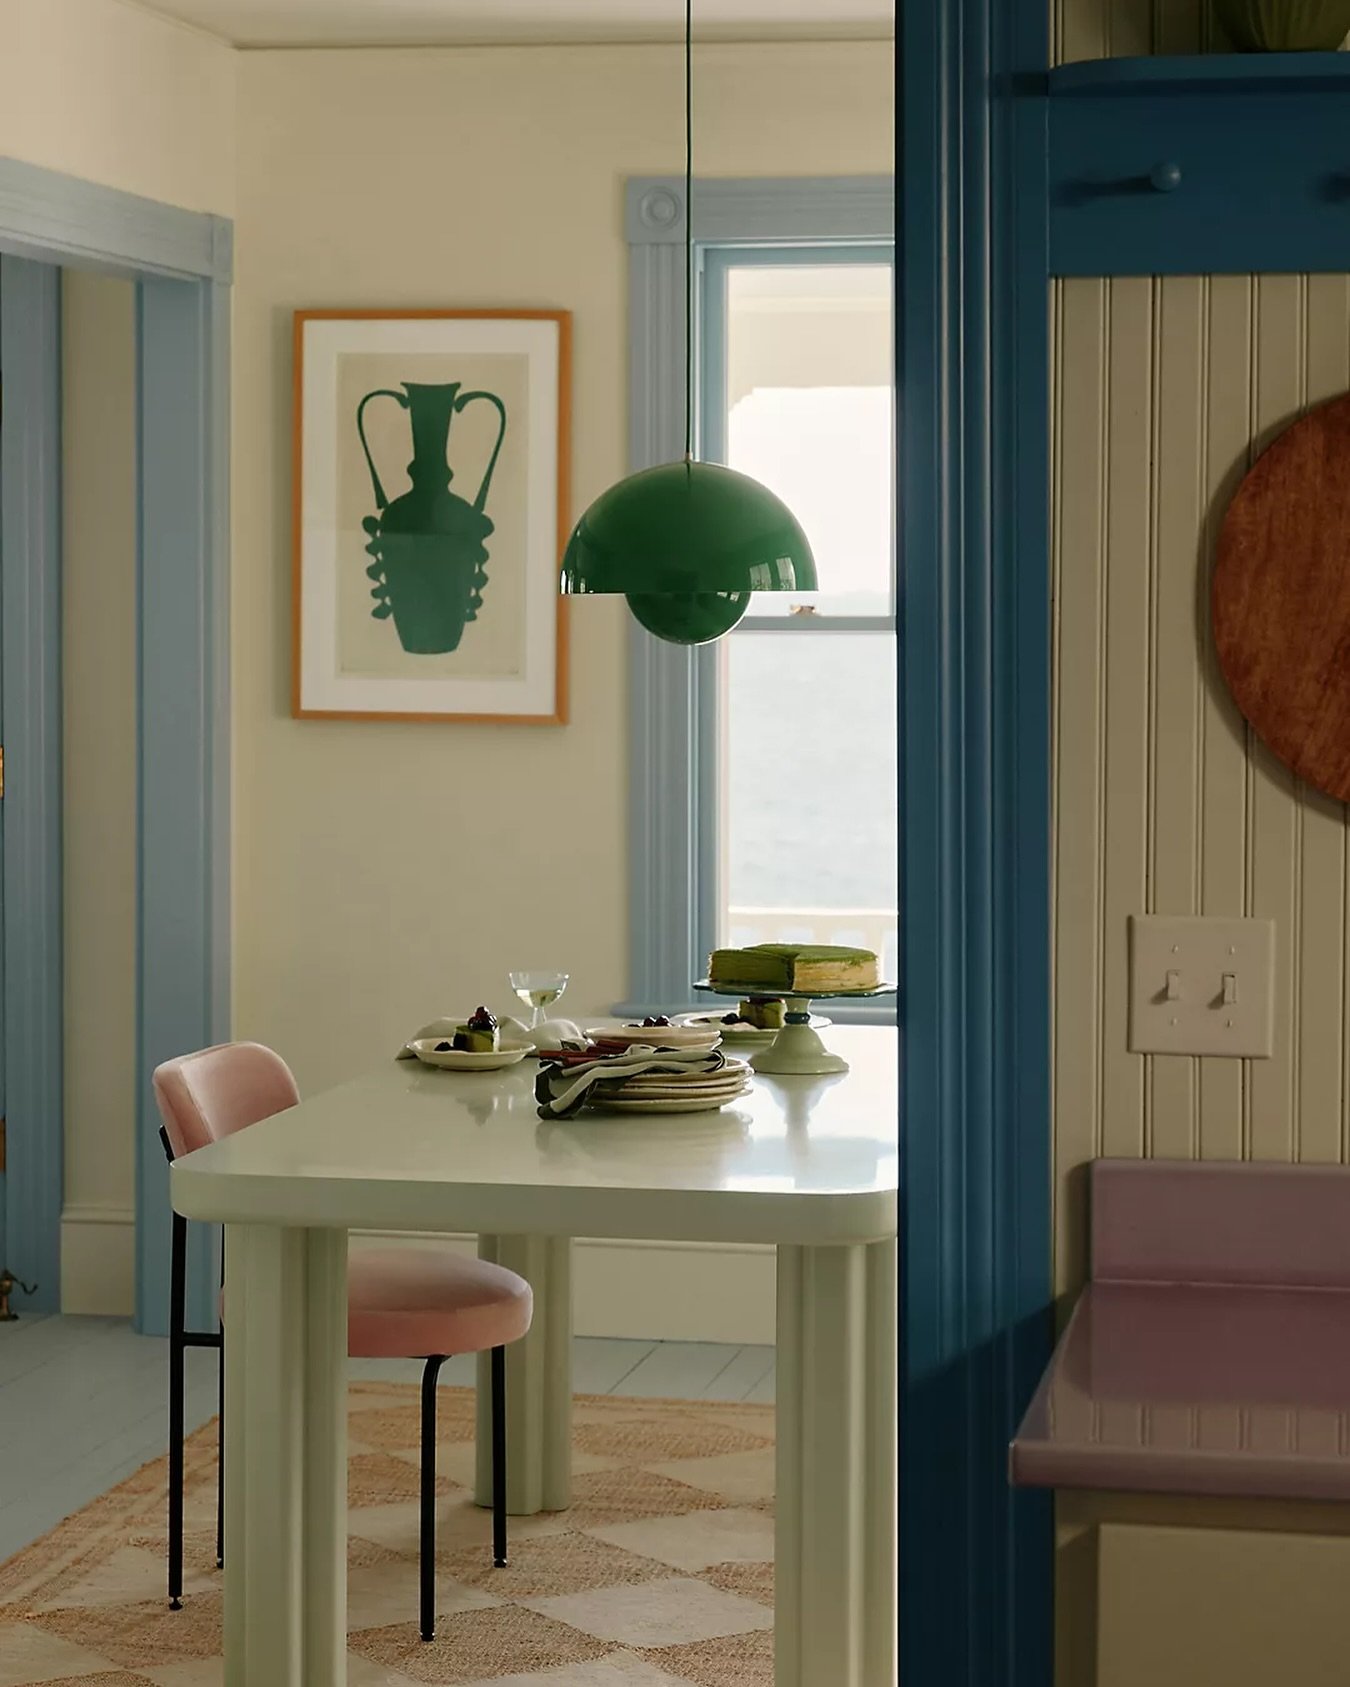 Loving the pastel hues, framing and colour pop lamp by @vernerpantonofficial in this dining room via @anthropologie 

~ 

#pastelhues #pastelpalette #colourpalette #colourpop #vernerpanton #colourfuldiningroom #decor #interiordesign #homedecor #decor